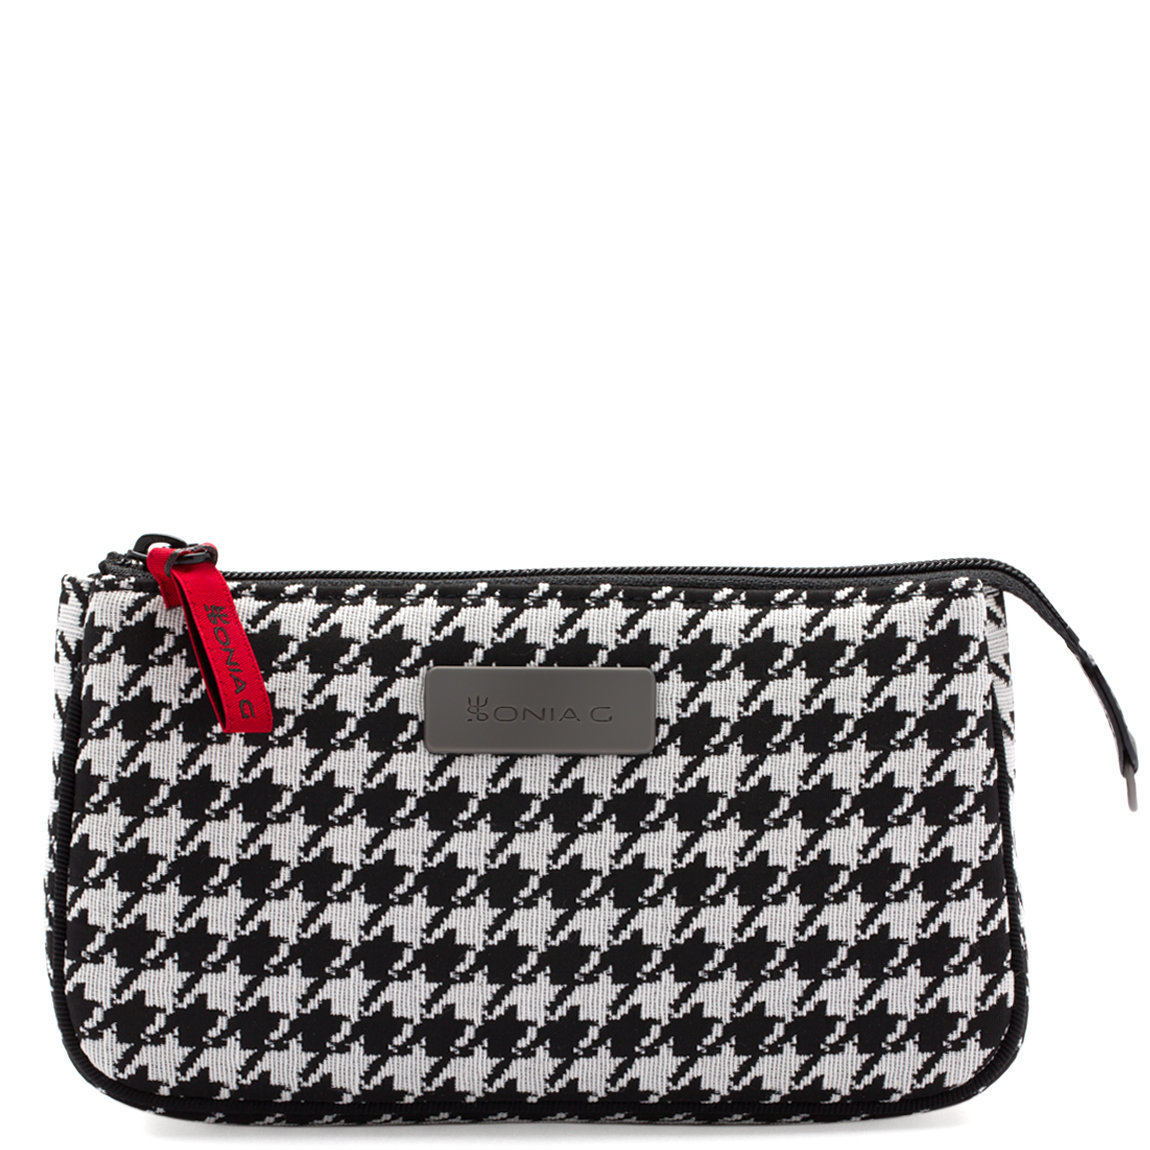 Sonia G. The Houndstooth Mini Zipped Pouch alternative view 1 - product swatch.